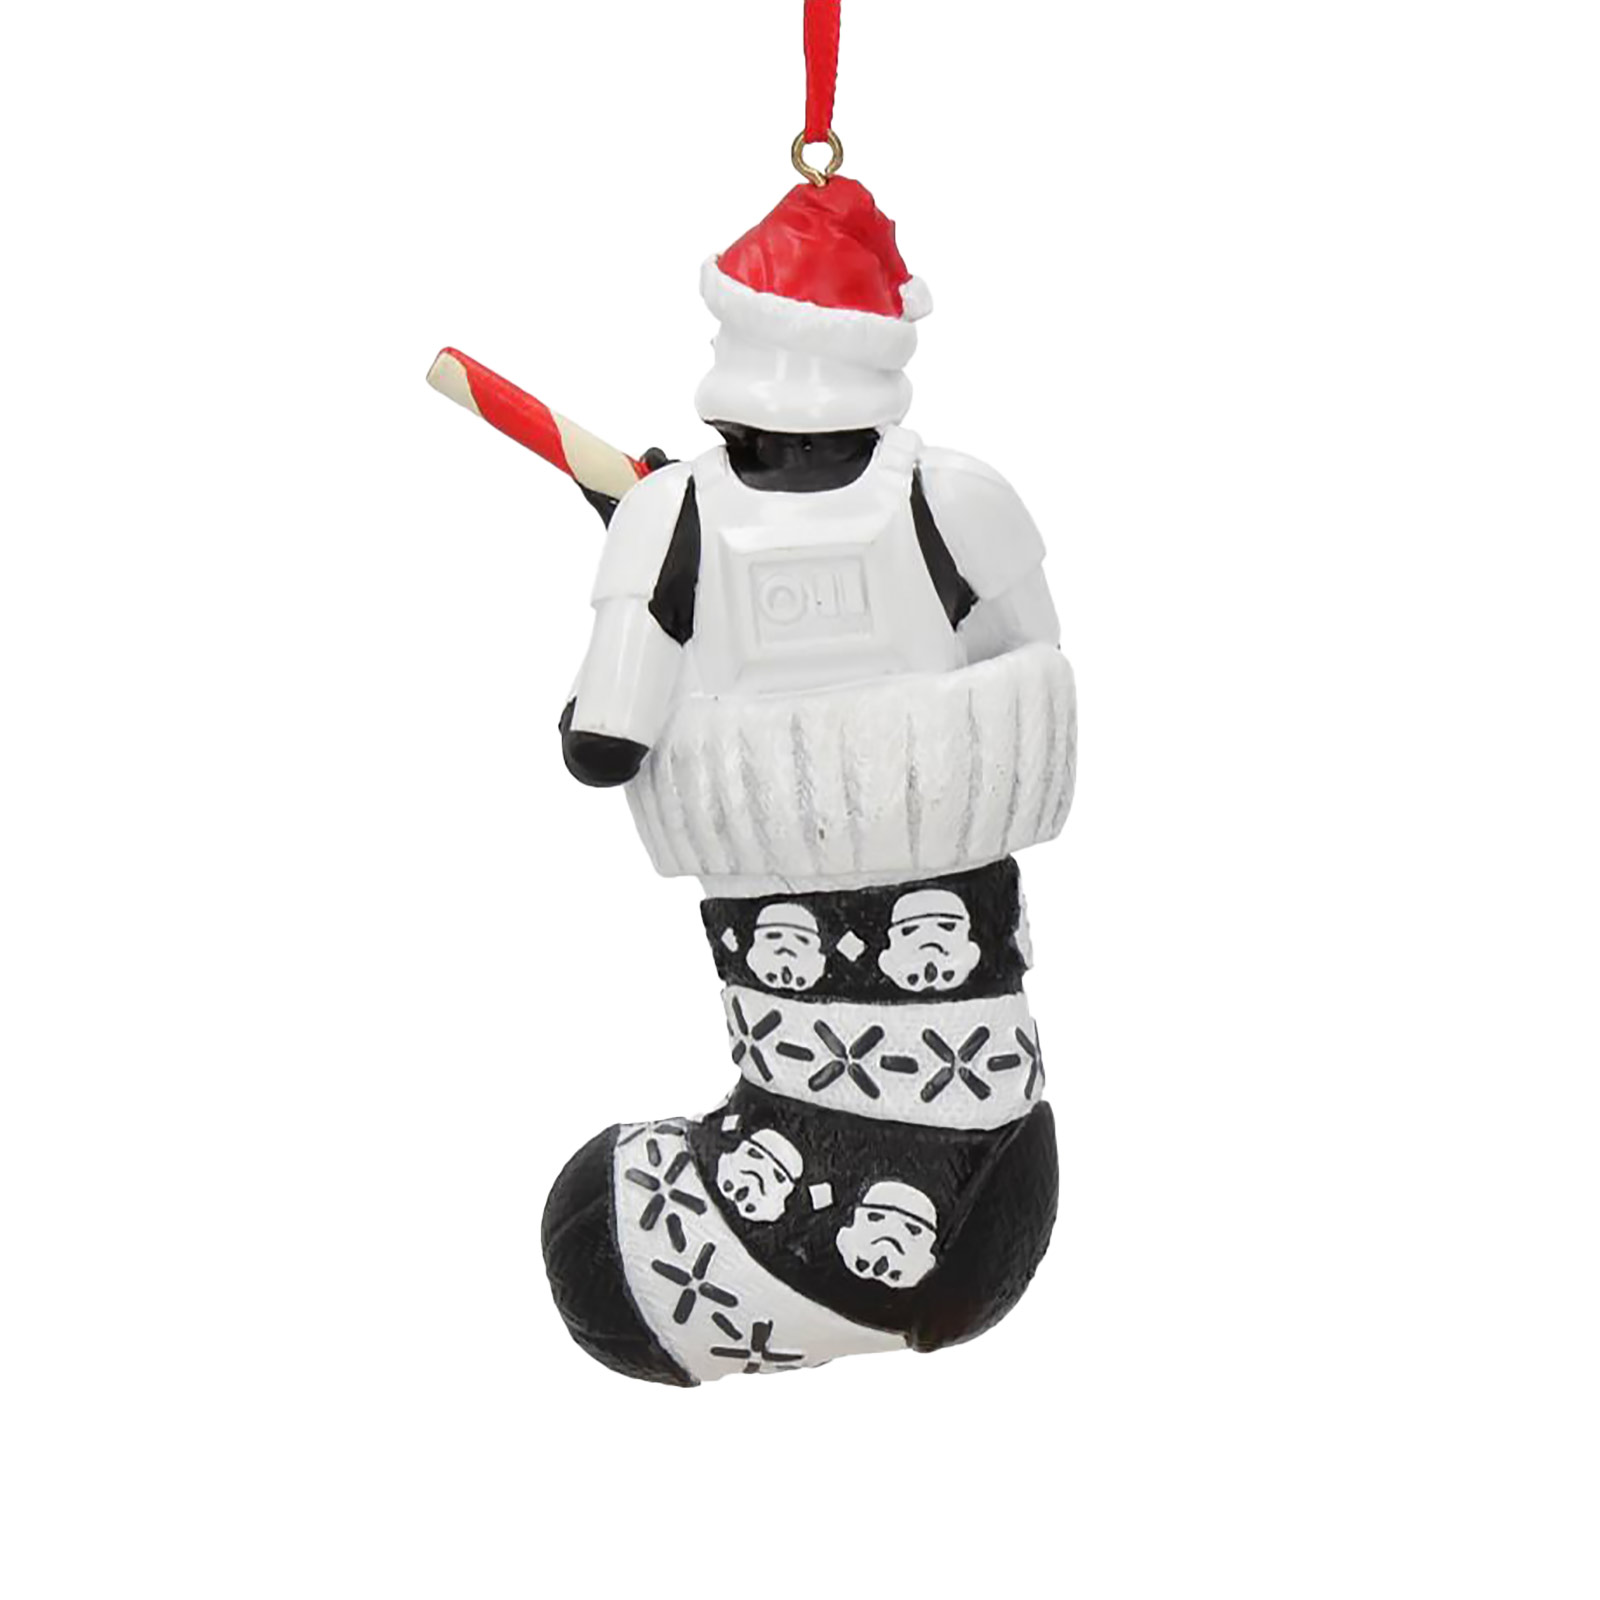 Stormtrooper in Christmas Stocking Christmas Tree Ornament - Star Wars